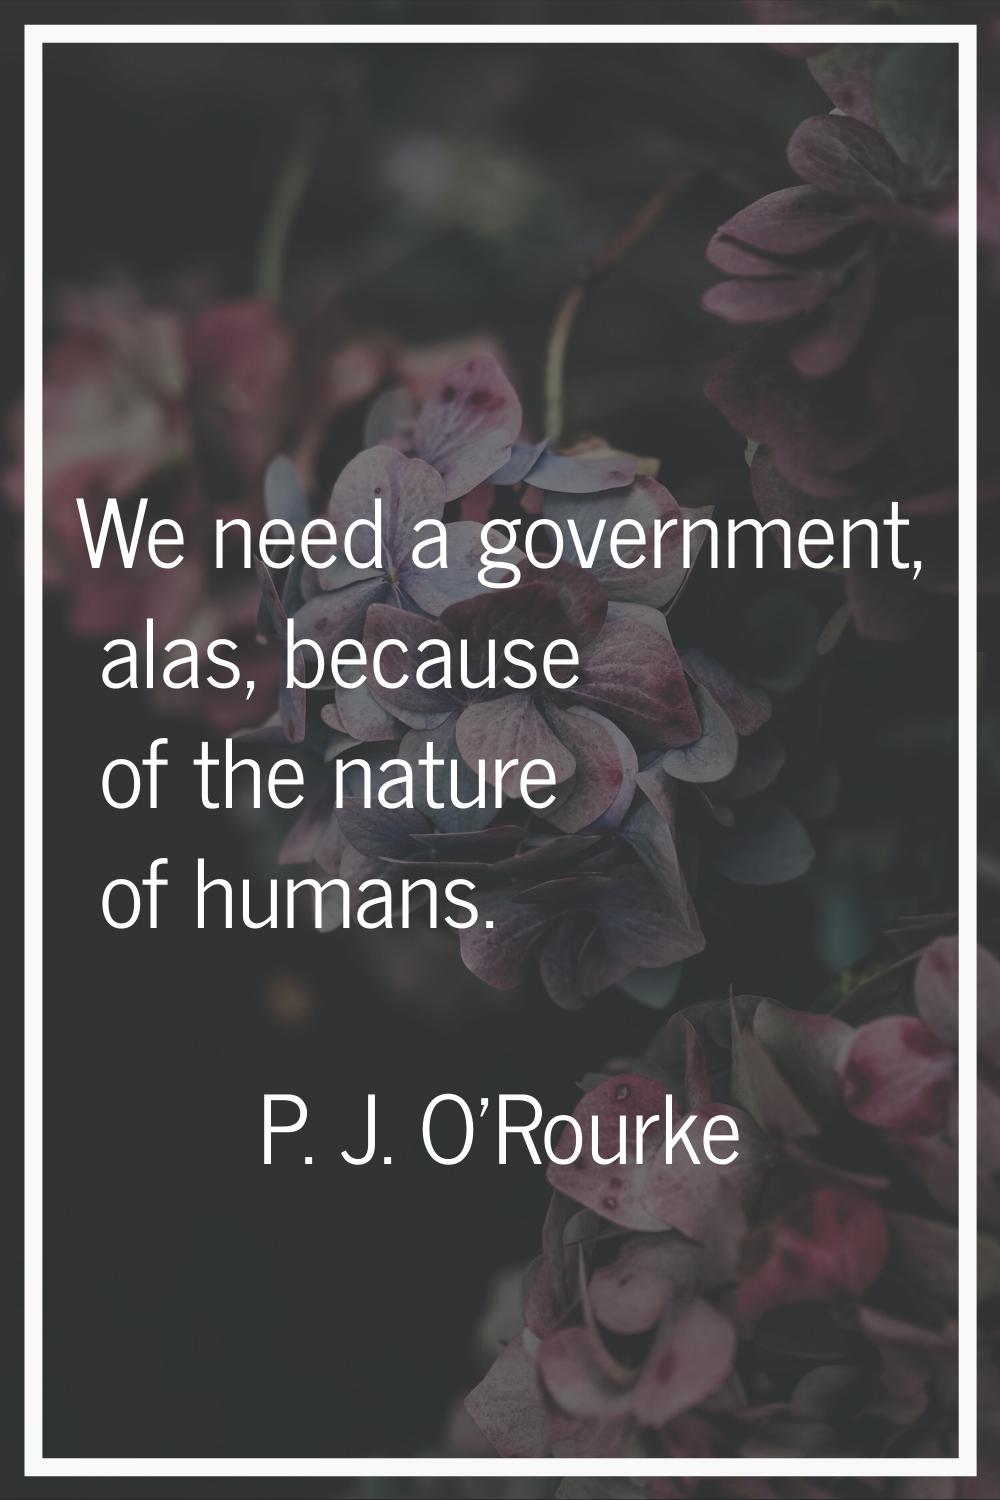 We need a government, alas, because of the nature of humans.